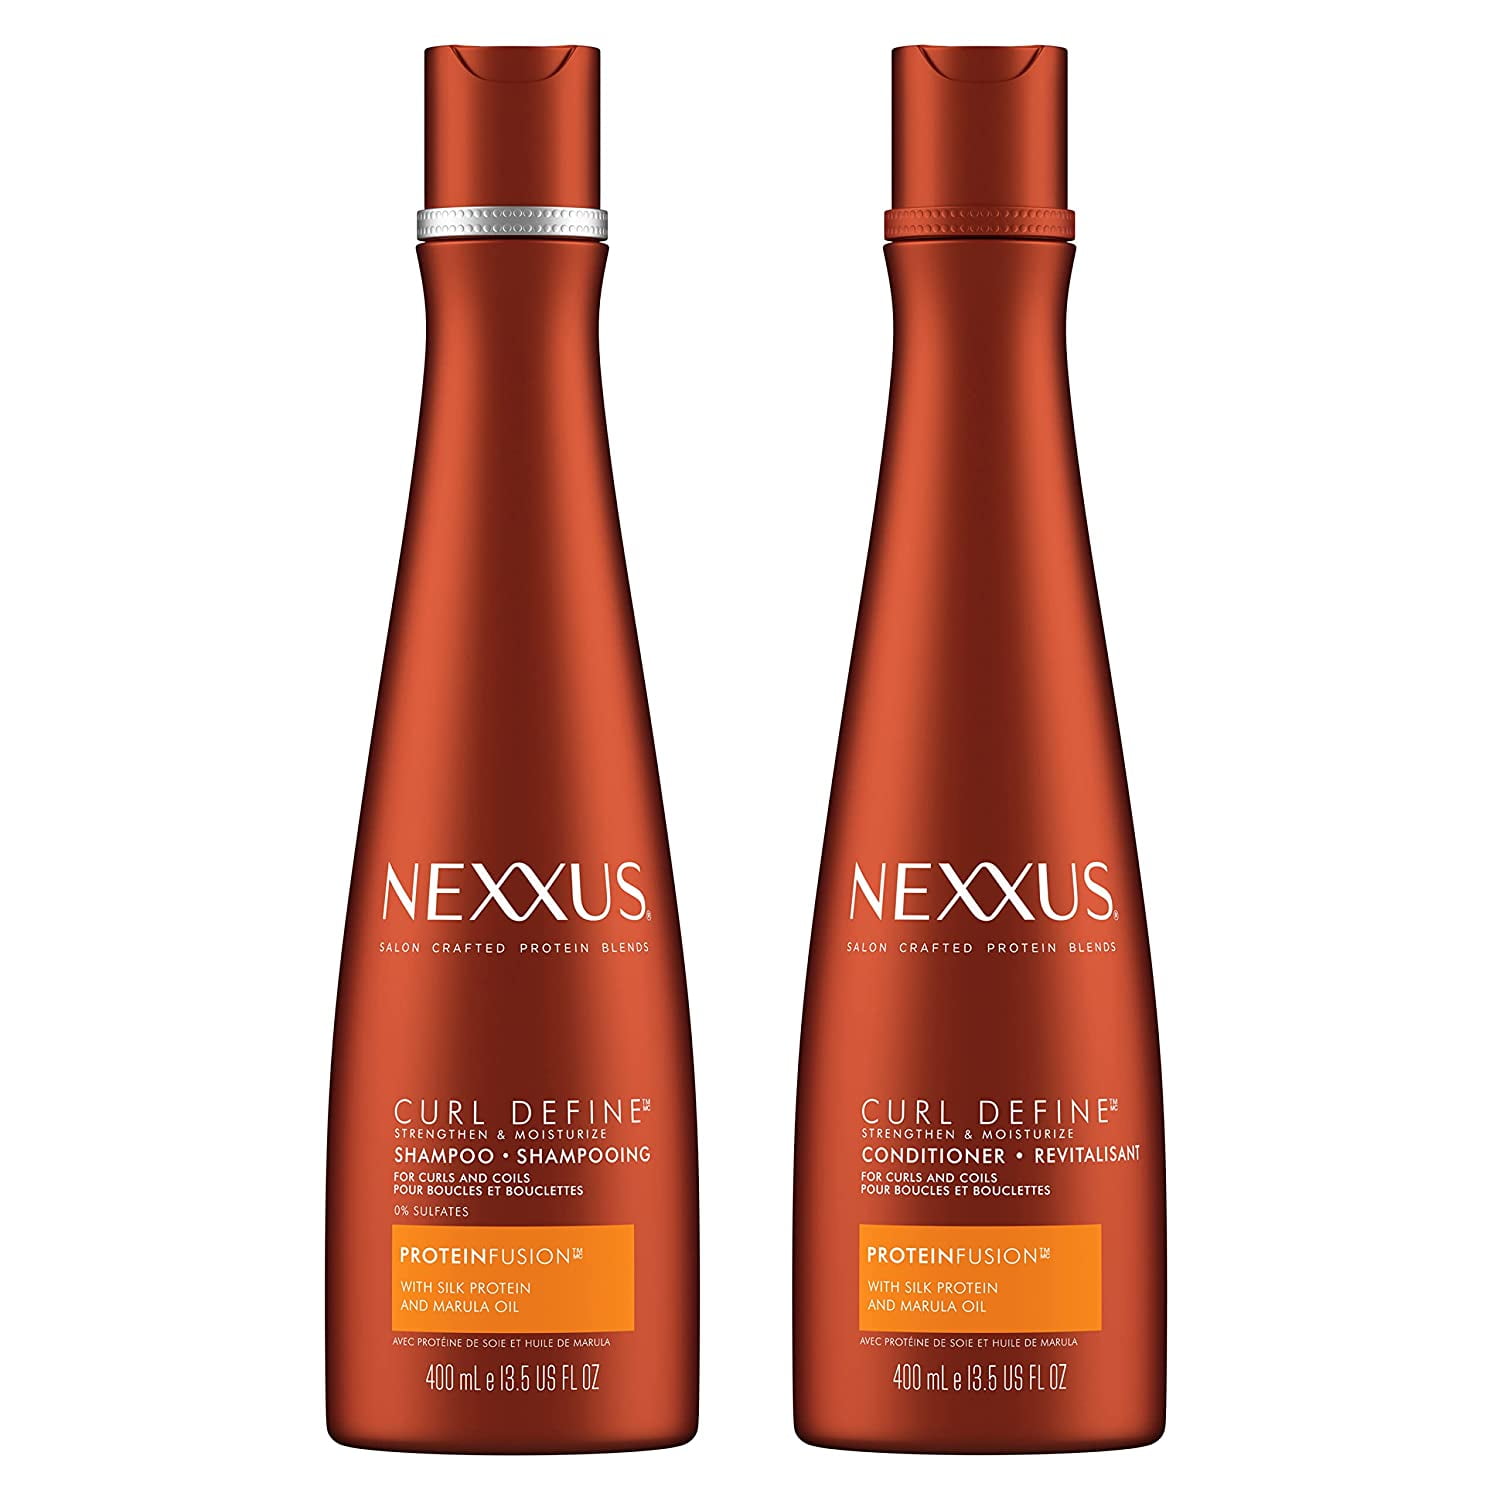 Nexxus Curl Define Shampoo and Conditioner for Curly and Coily Hair  ProteinFusion Strengthening & Moisturizing Sulfate-Free Hair Products with  Marula Oil  oz, 2 Count 